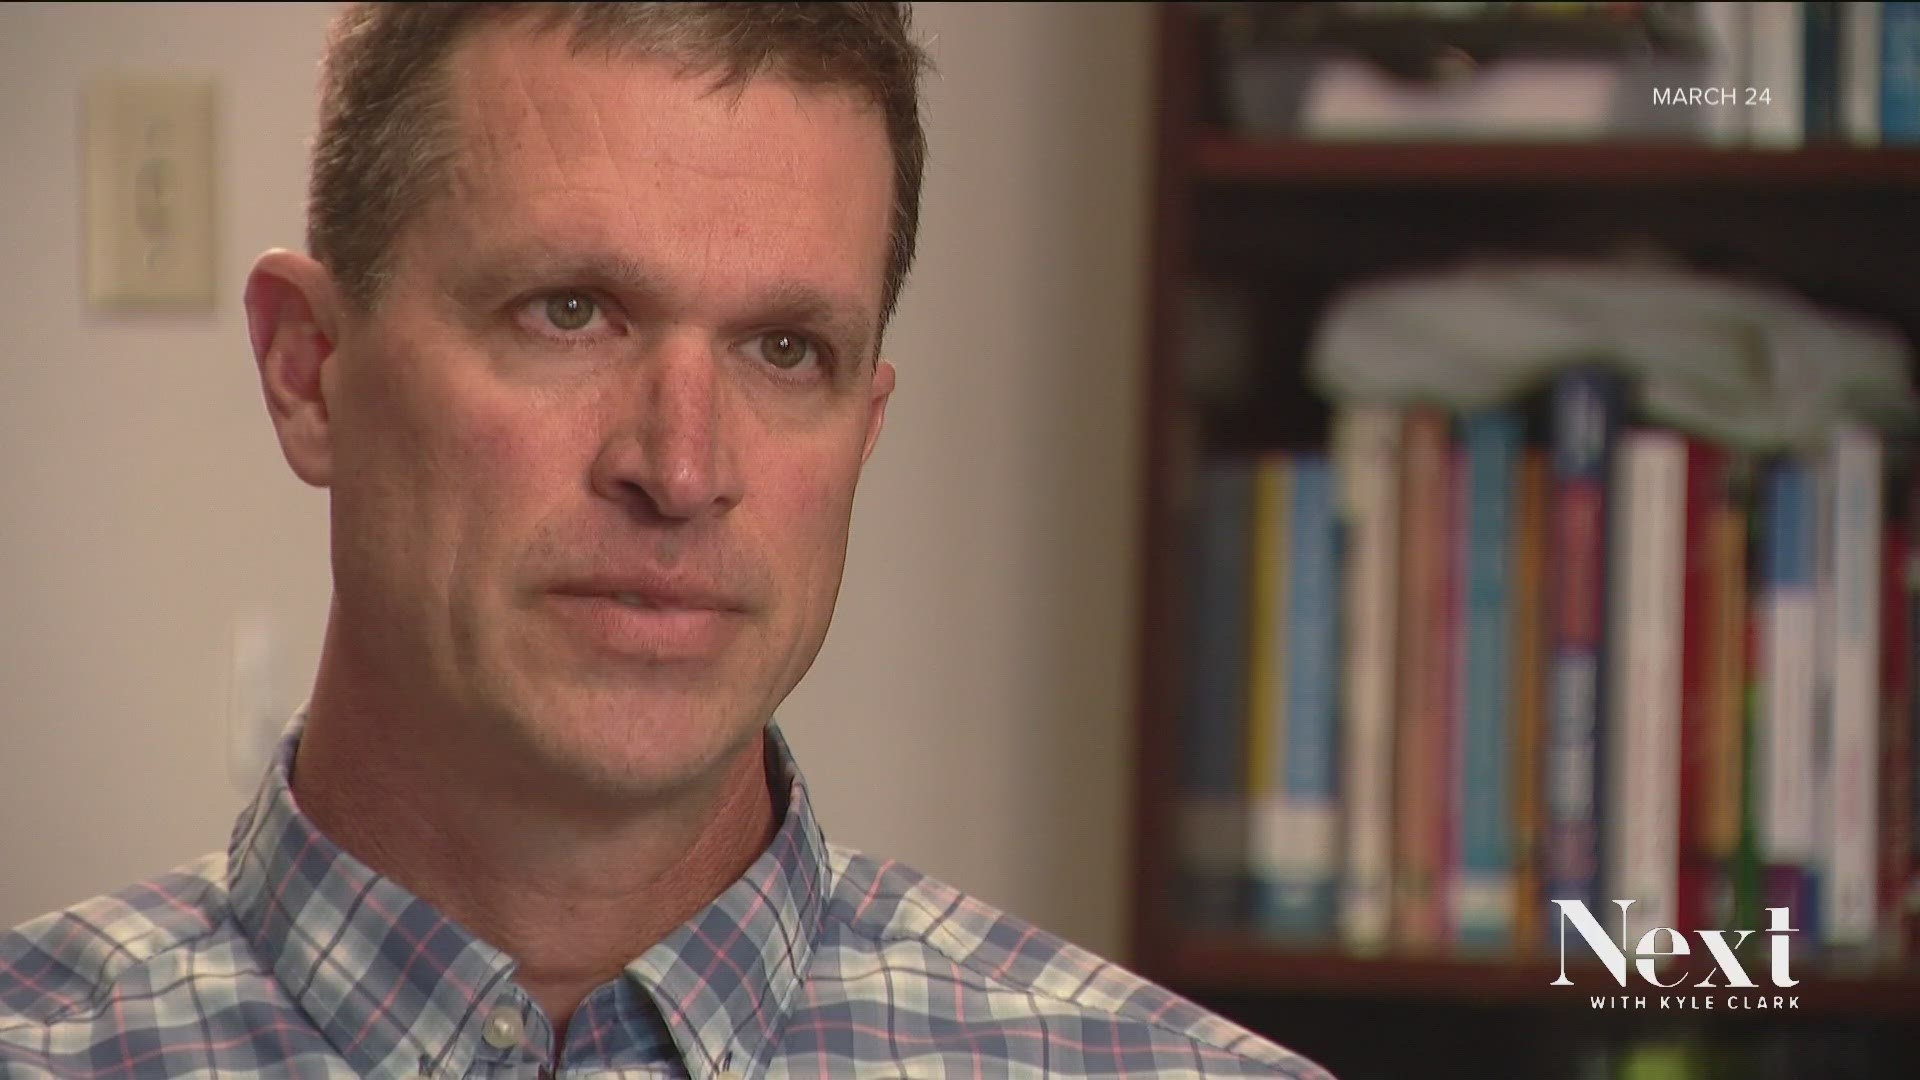 A Denver middle school principal acknowledged he was taking a risk by speaking to 9NEWS about his concerns last month. Today we learned his concerns were valid.